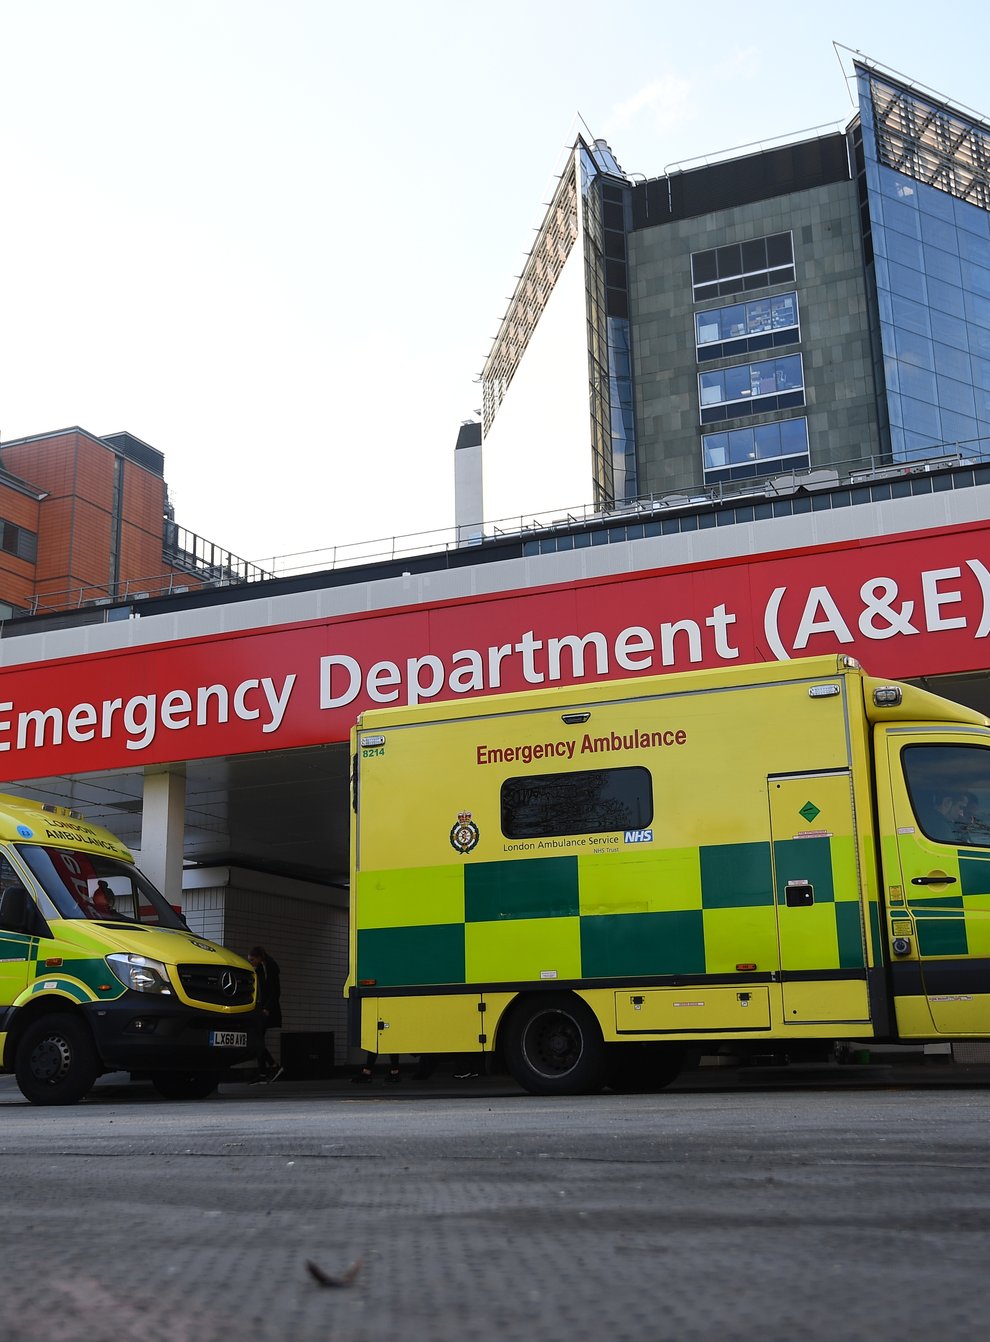 Paramedics should be able to hand patients over to A&E staff within 15 minutes of arriving at hospital (Victoria Jones/PA)